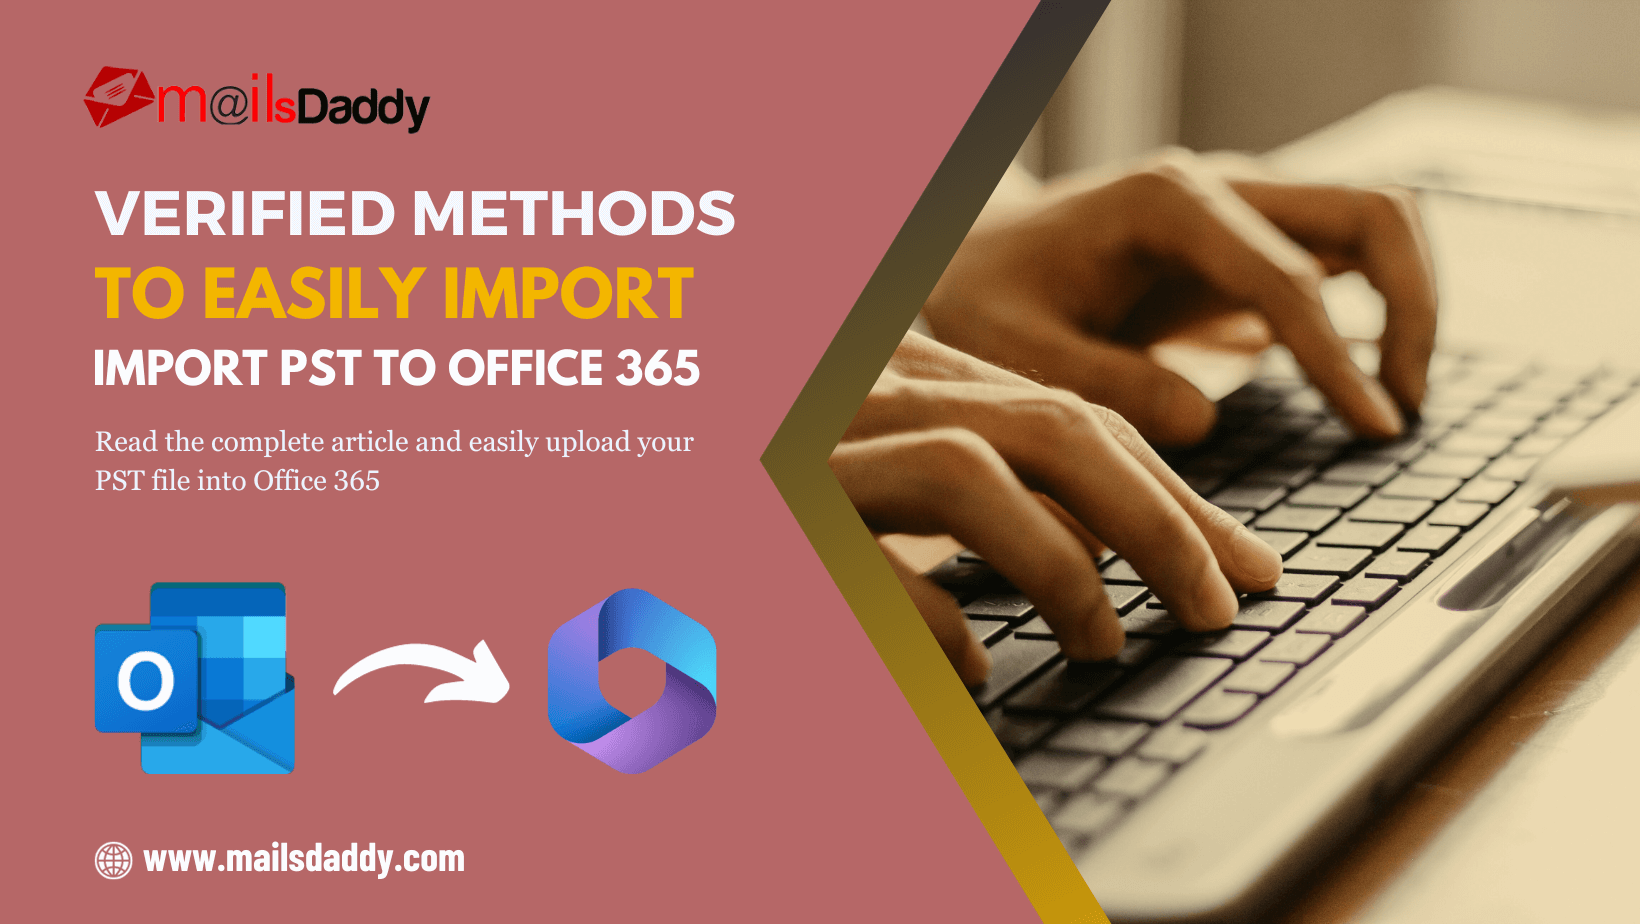 Verified Methods to Easily Import PST to Office 365 - World News Spot